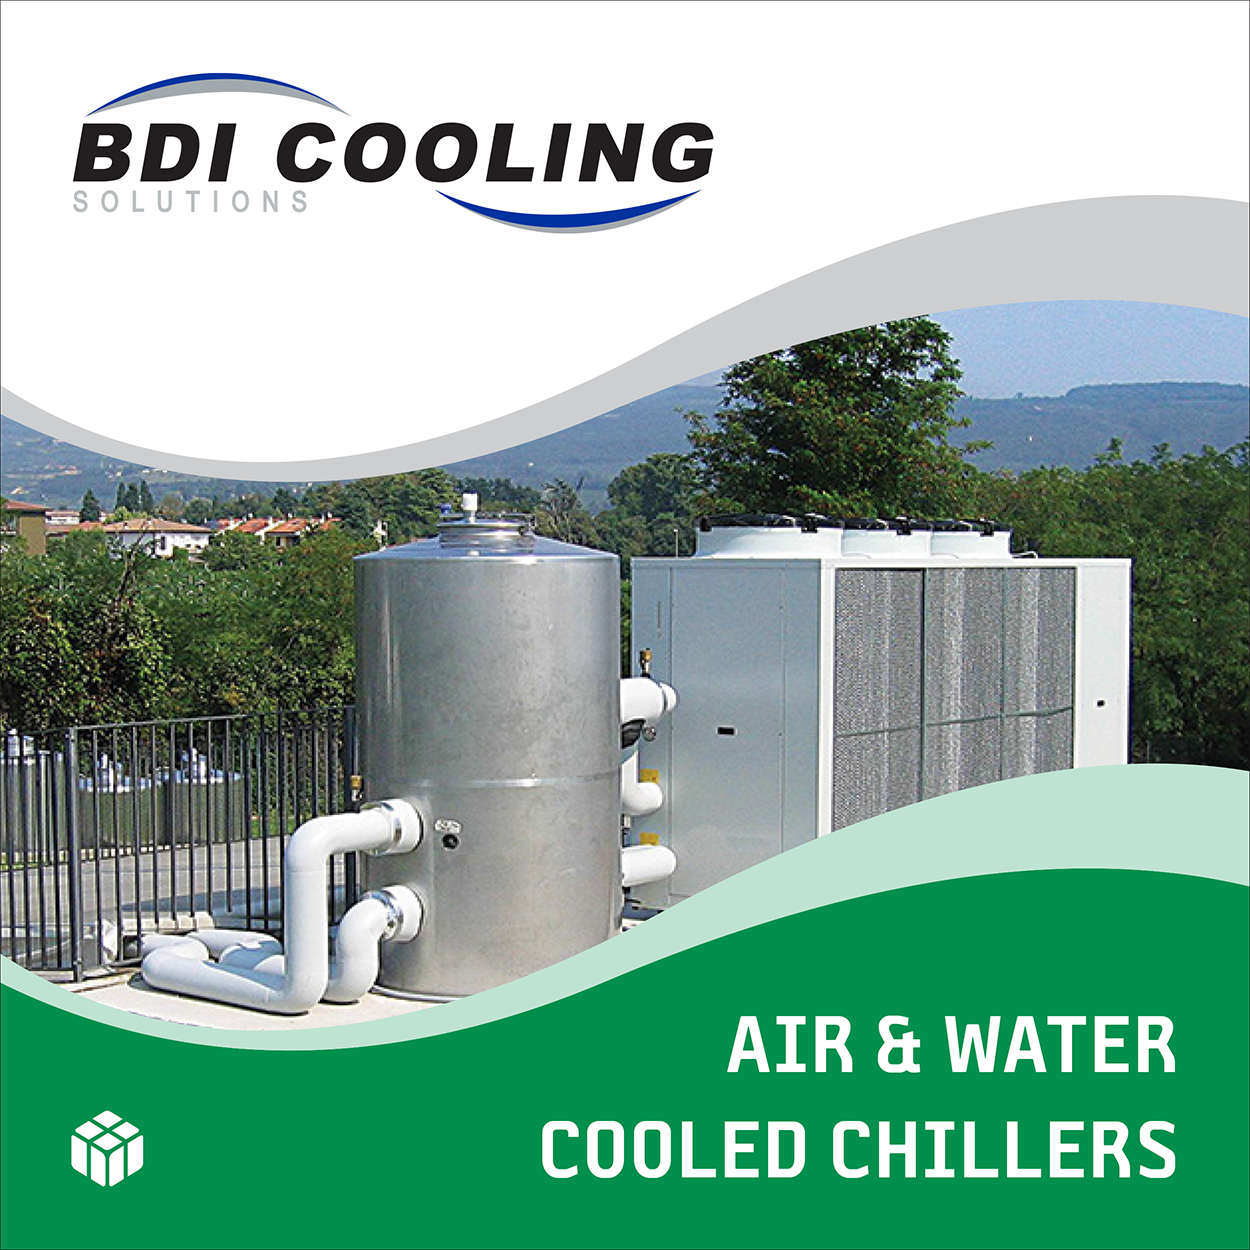 Air & Water Cooled Chillers